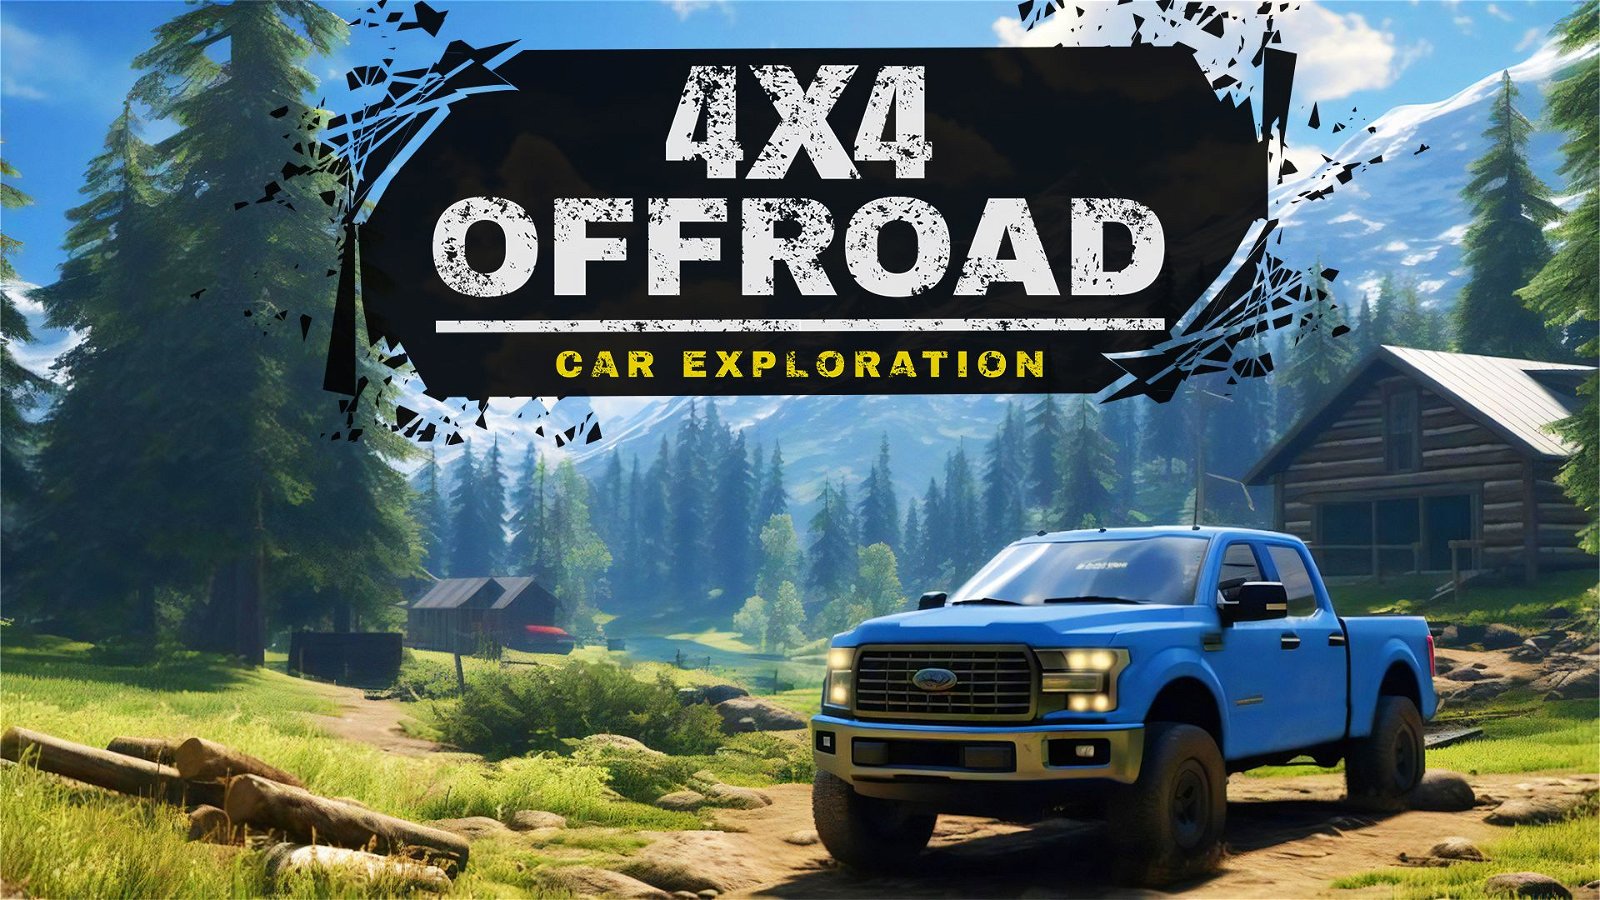 Image of 4x4 Offroad Car Exploration